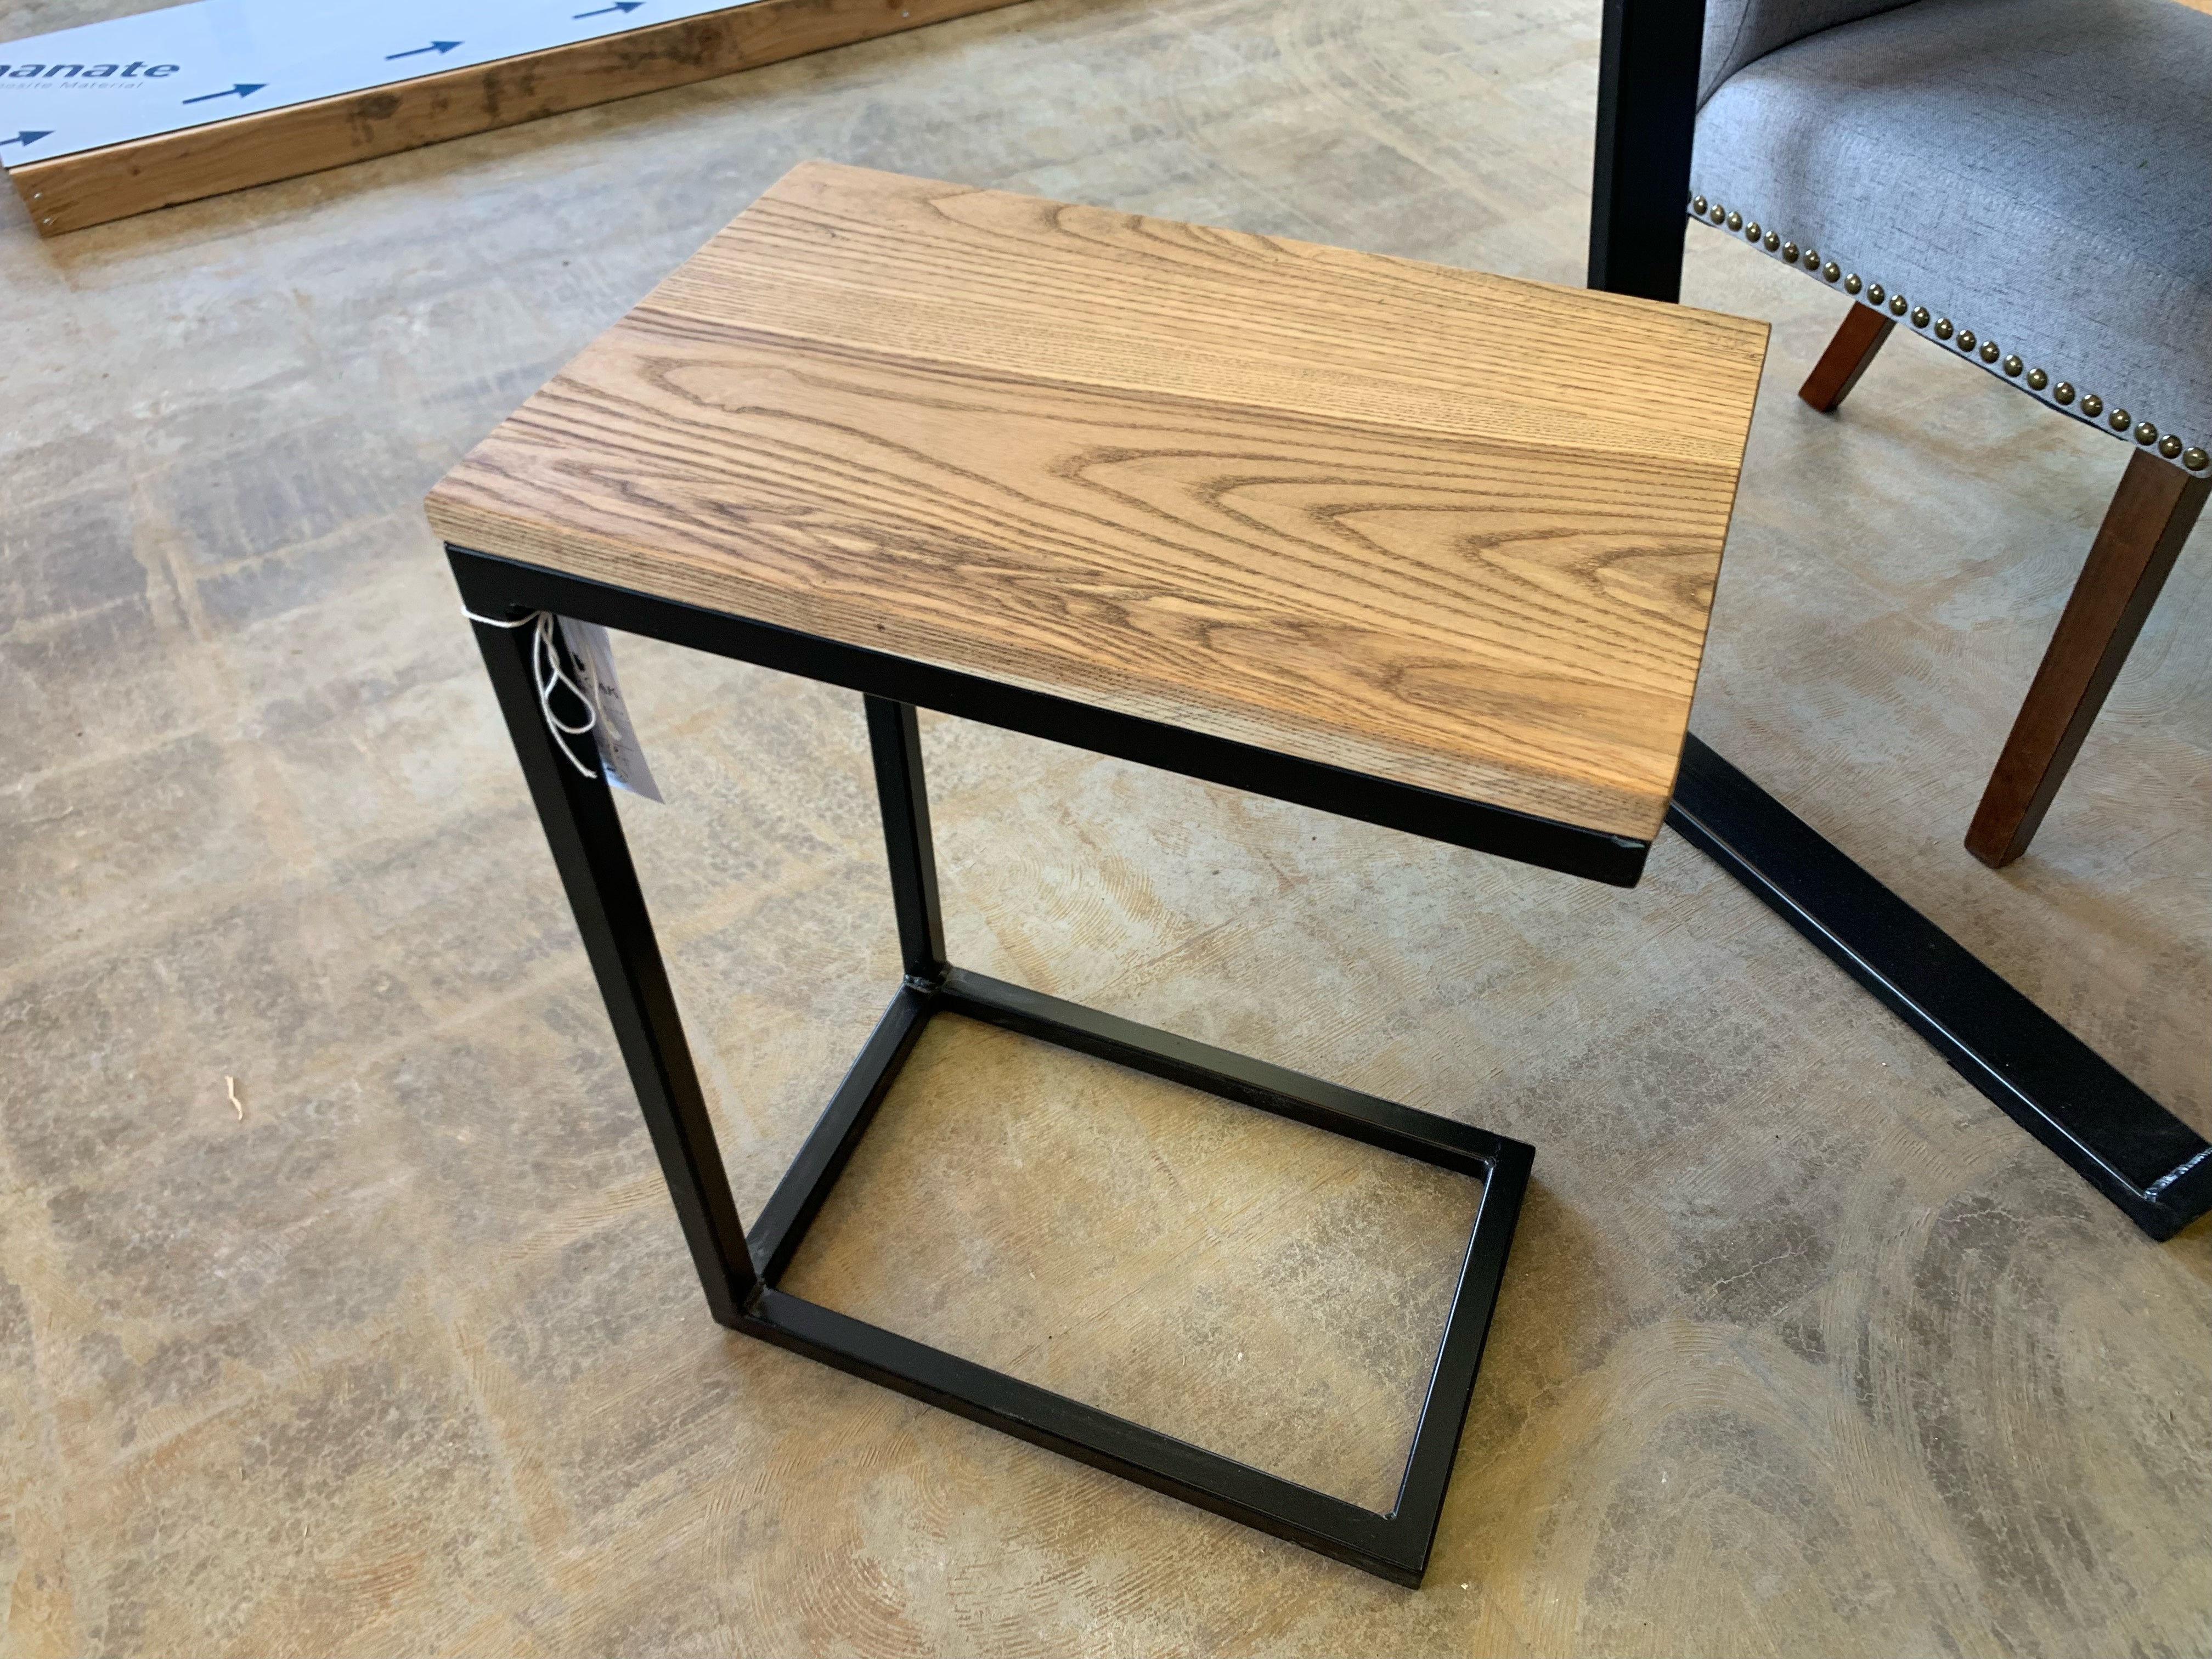 Solid Ash Wood &amp; Black Metal C Table with Walnut Stain (in stock) - Hazel Oak Farms